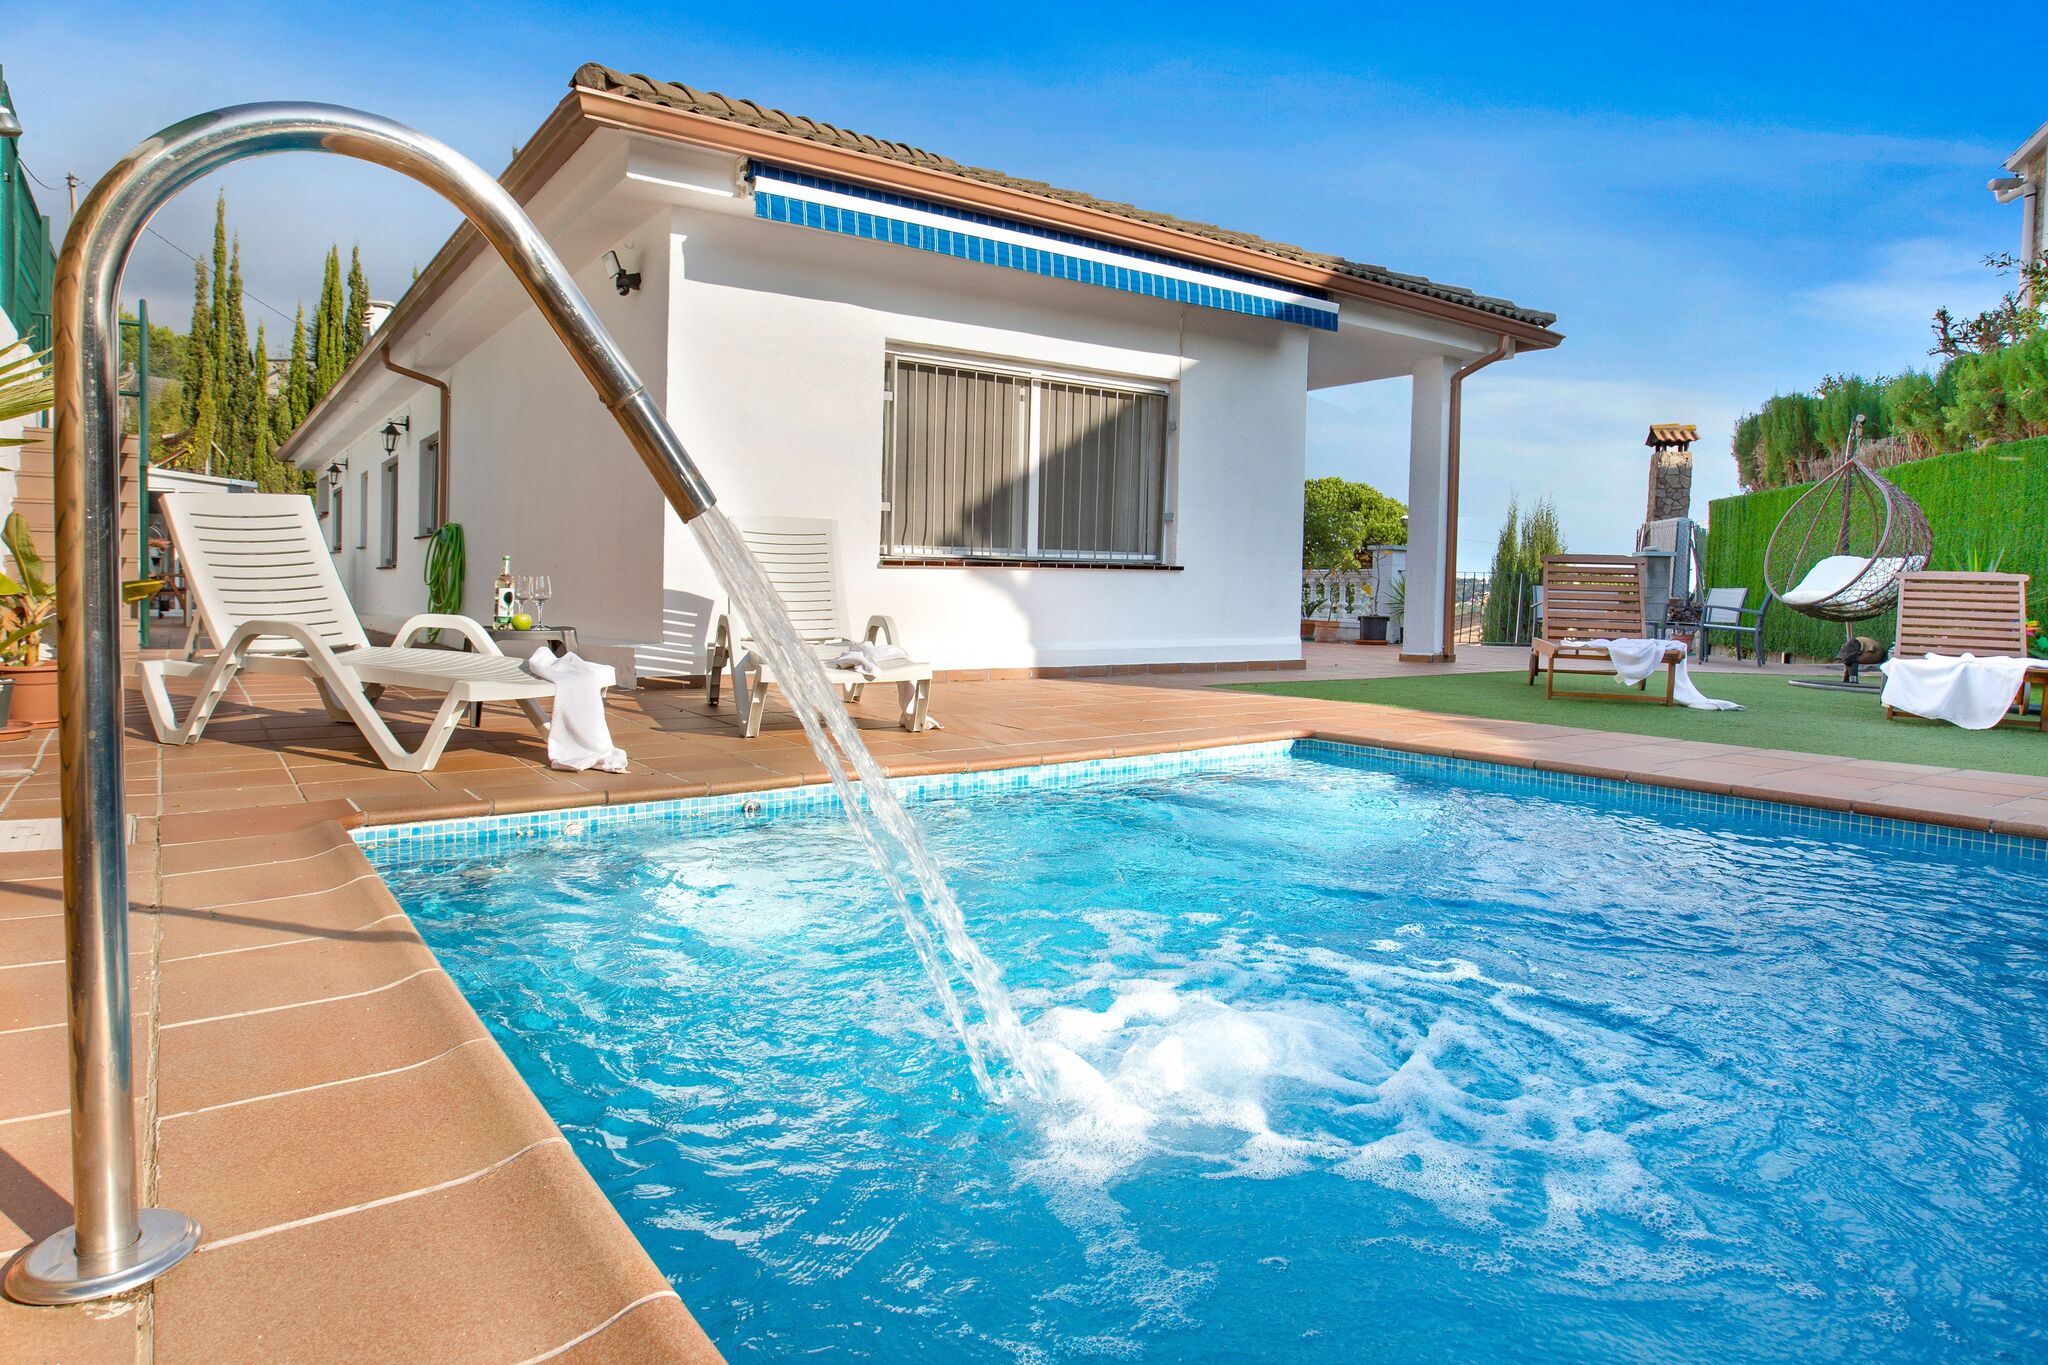 Beautiful holiday home in Blanes, with a private pool and sea view